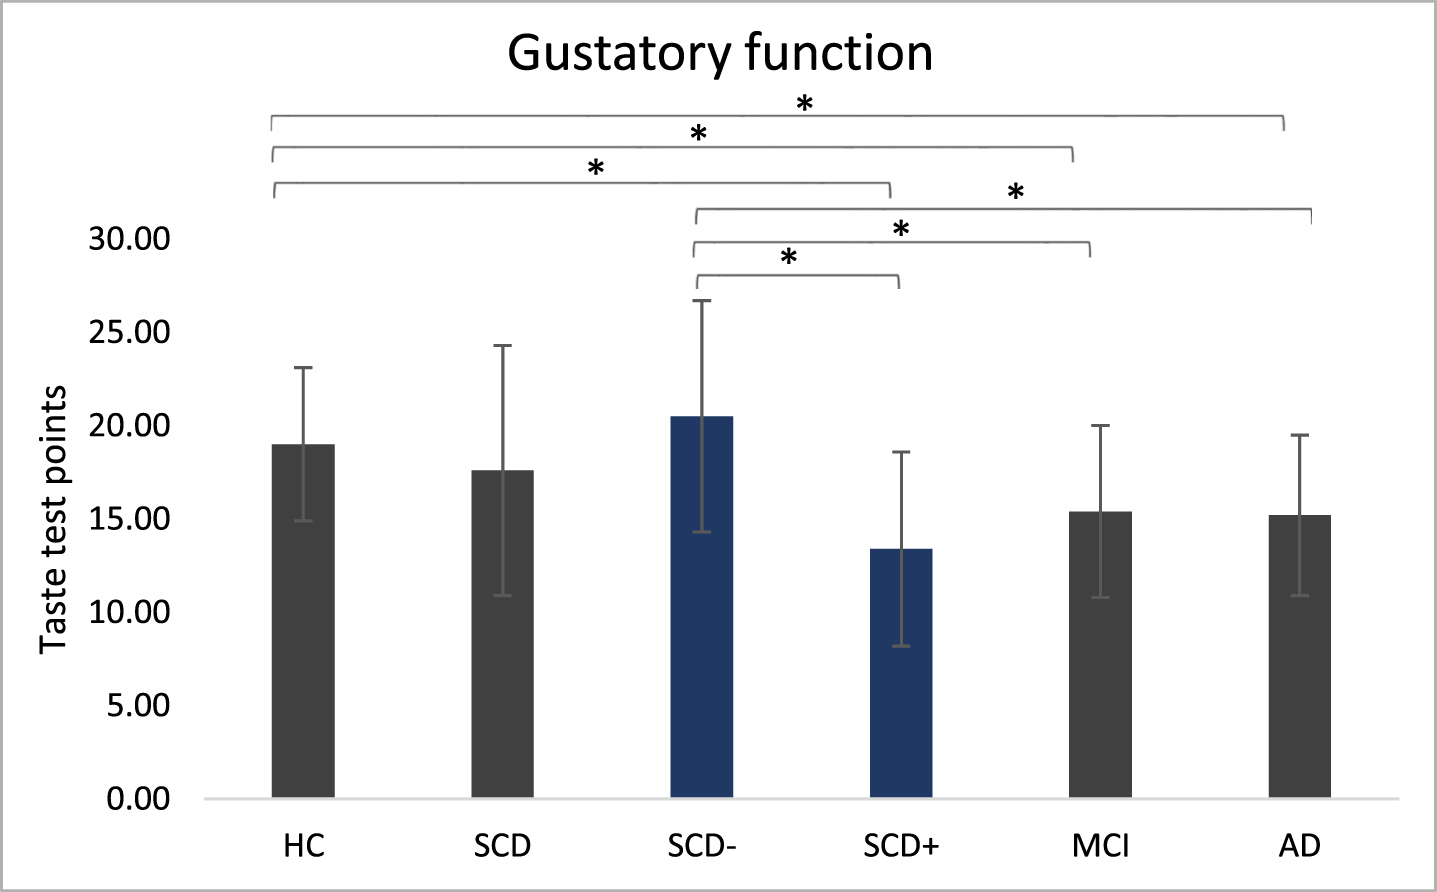 Gustatory function. Taste performance in main groups and subgroups measured with the taste test. ANOVAs were run separately for main group analysis (HC, SCD, MCI, AD) and for subgroup analysis (SCD–, SCD+ added).  *p < 0.05.